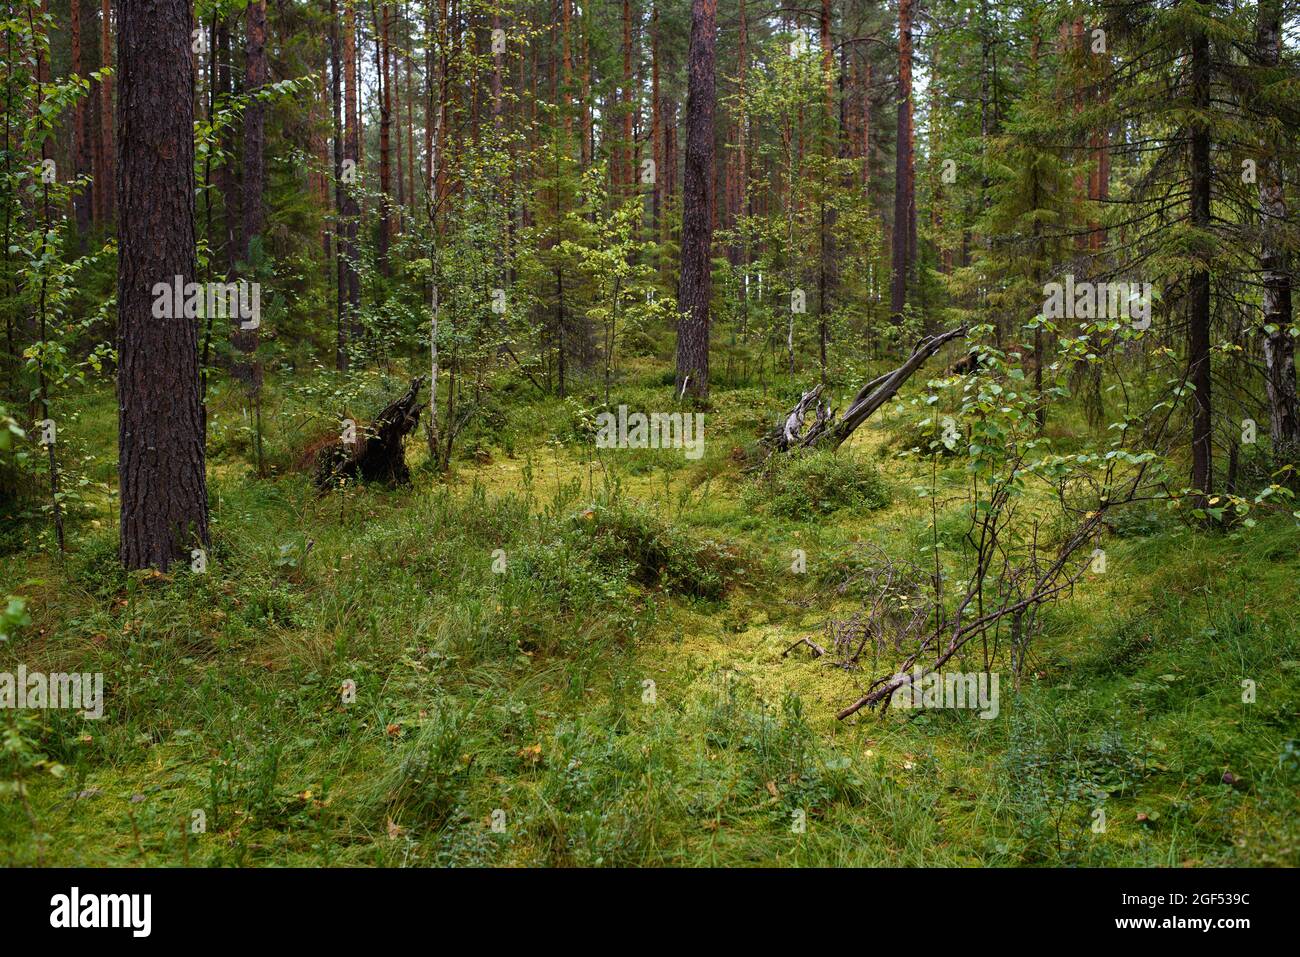 A path leading through a swampy area in the forest. Stock Photo